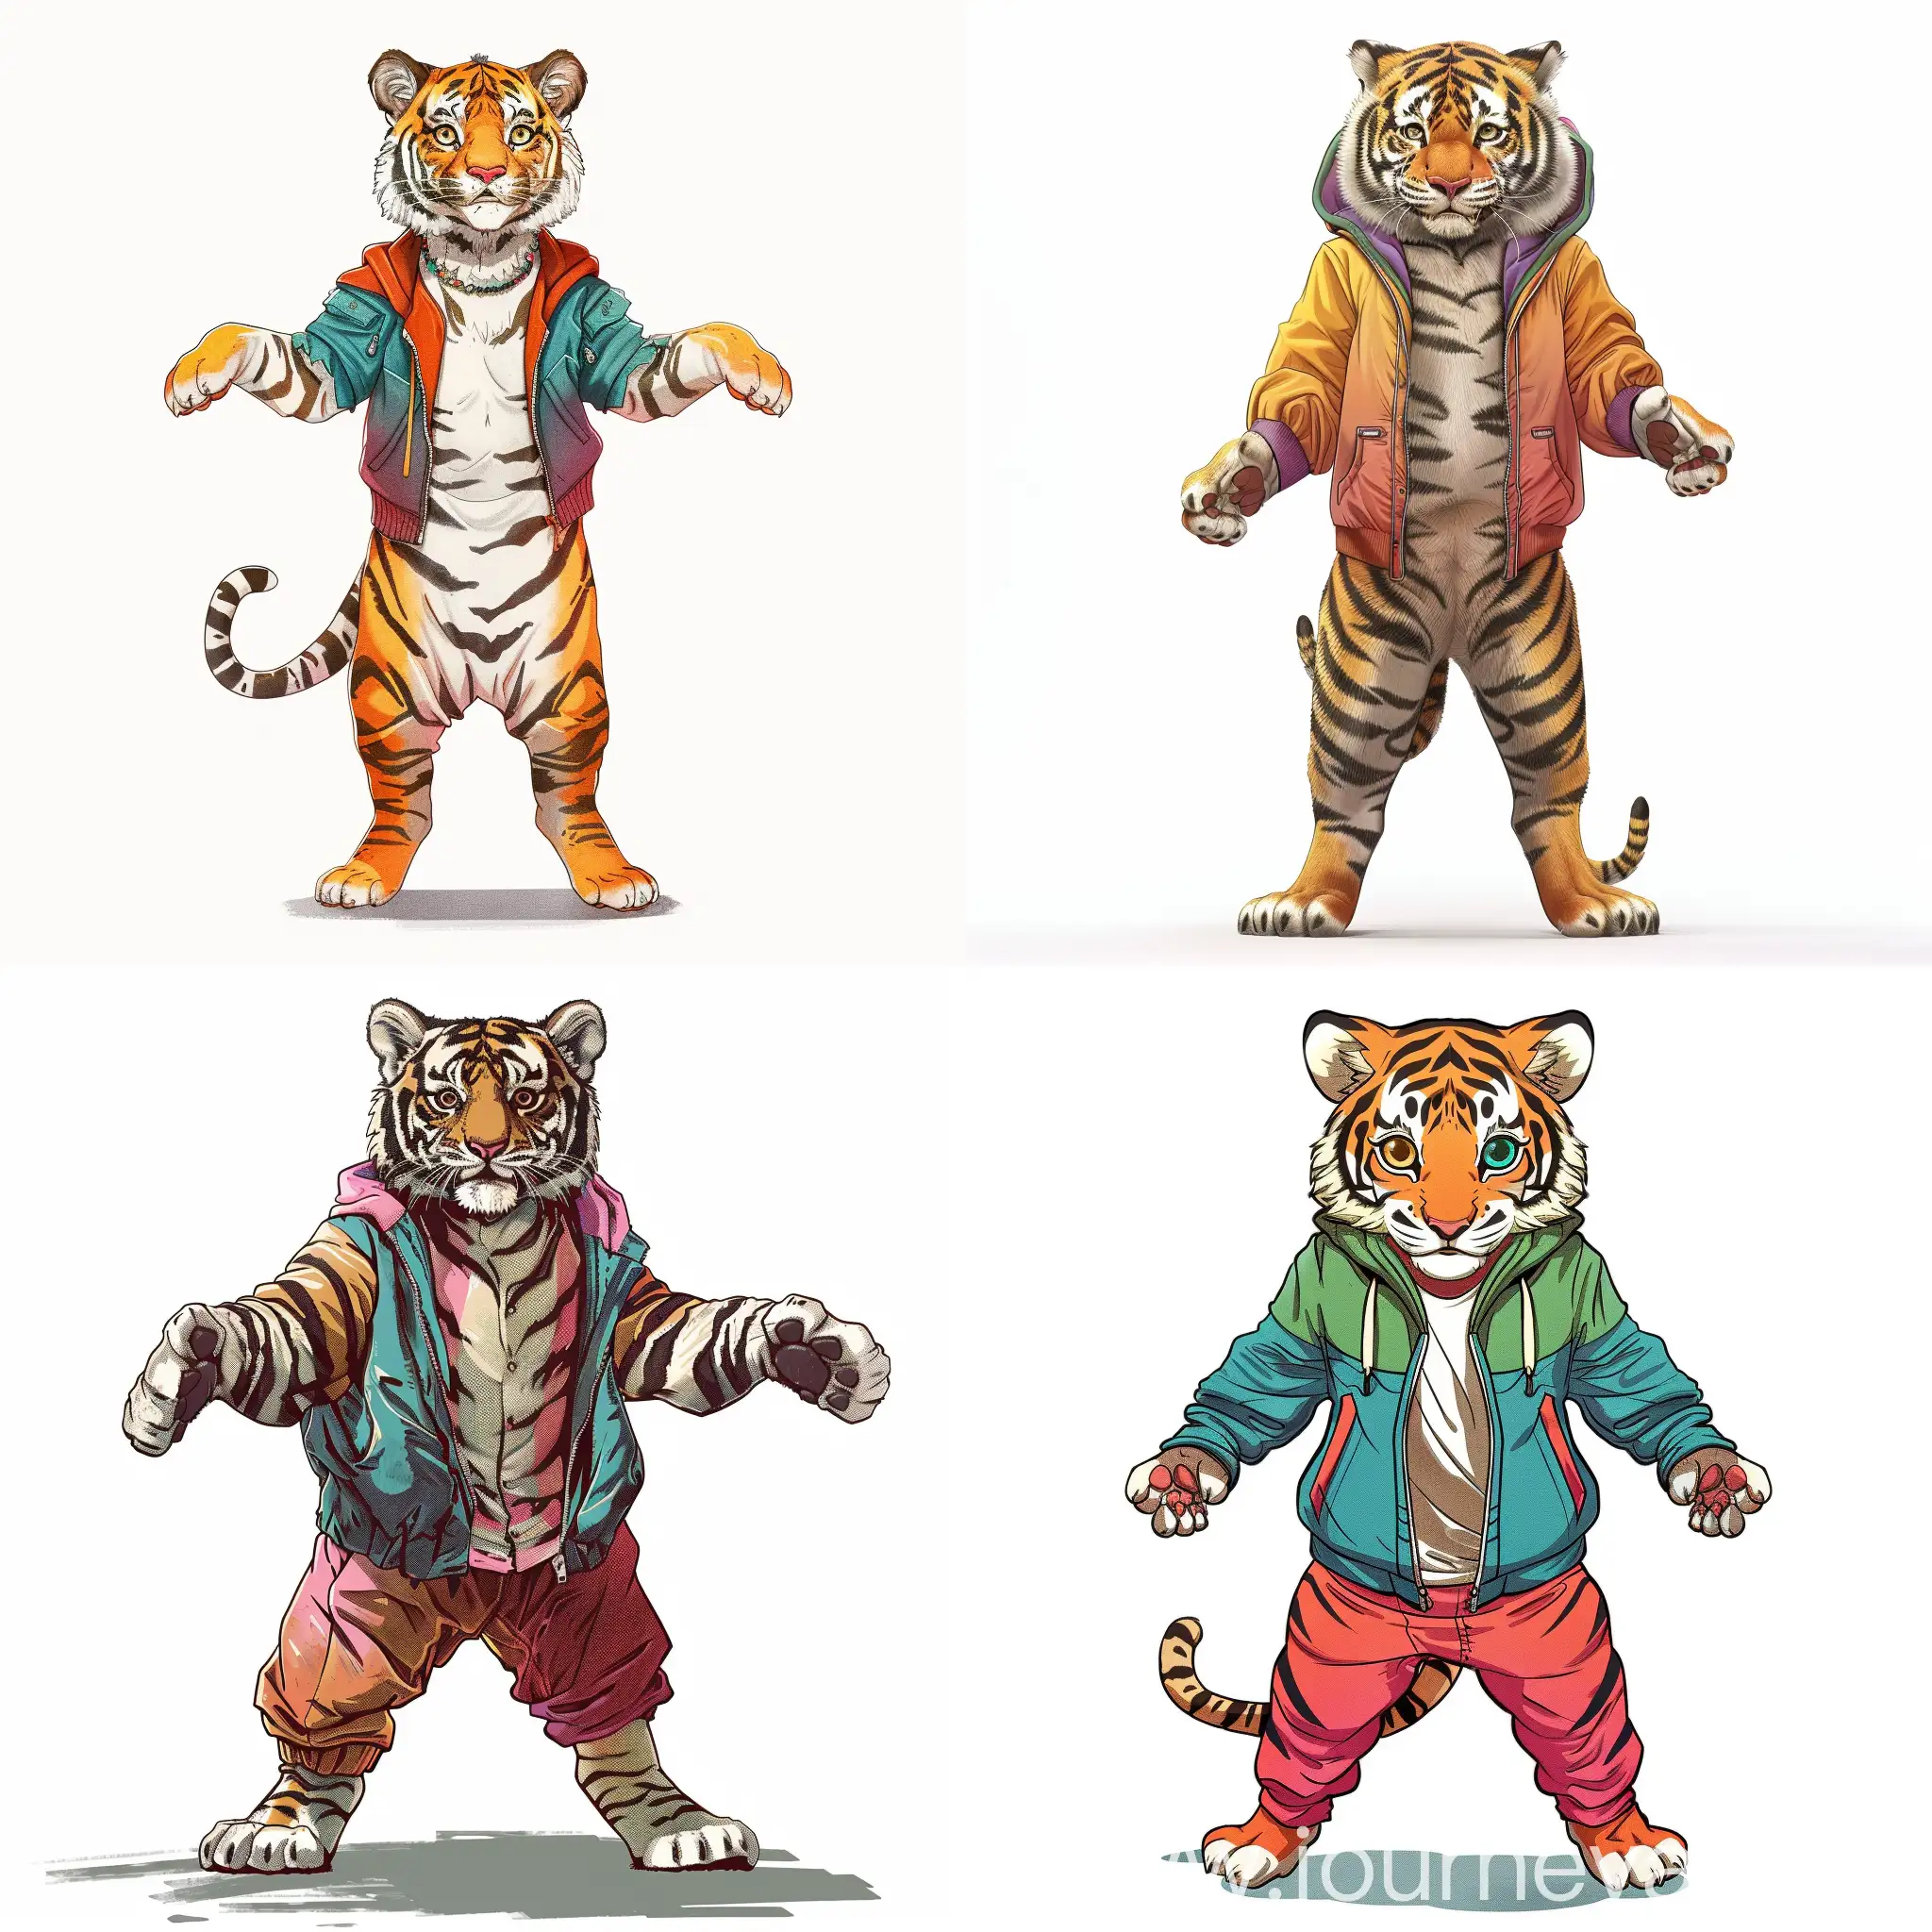 Adorable-Cartoon-Tiger-Cub-in-Colorful-Outfit-Standing-Tall